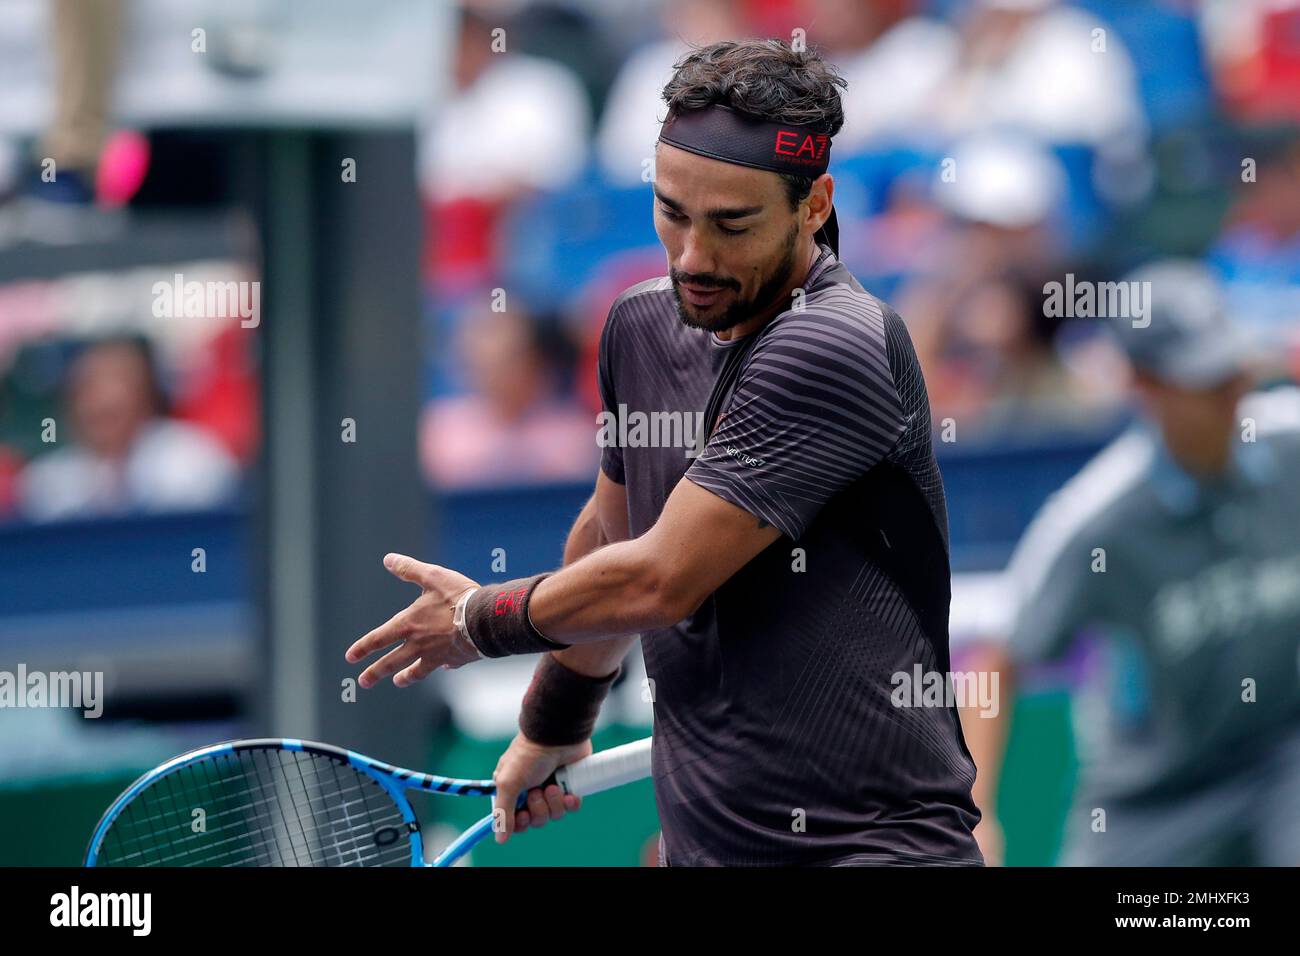 Fabio Fognini of Italy reacts during the mens singles quarterfinals match against Daniil Medvedev of Russia at the Shanghai Masters tennis tournament at Qizhong Forest Sports City Tennis Center in Shanghai, China,